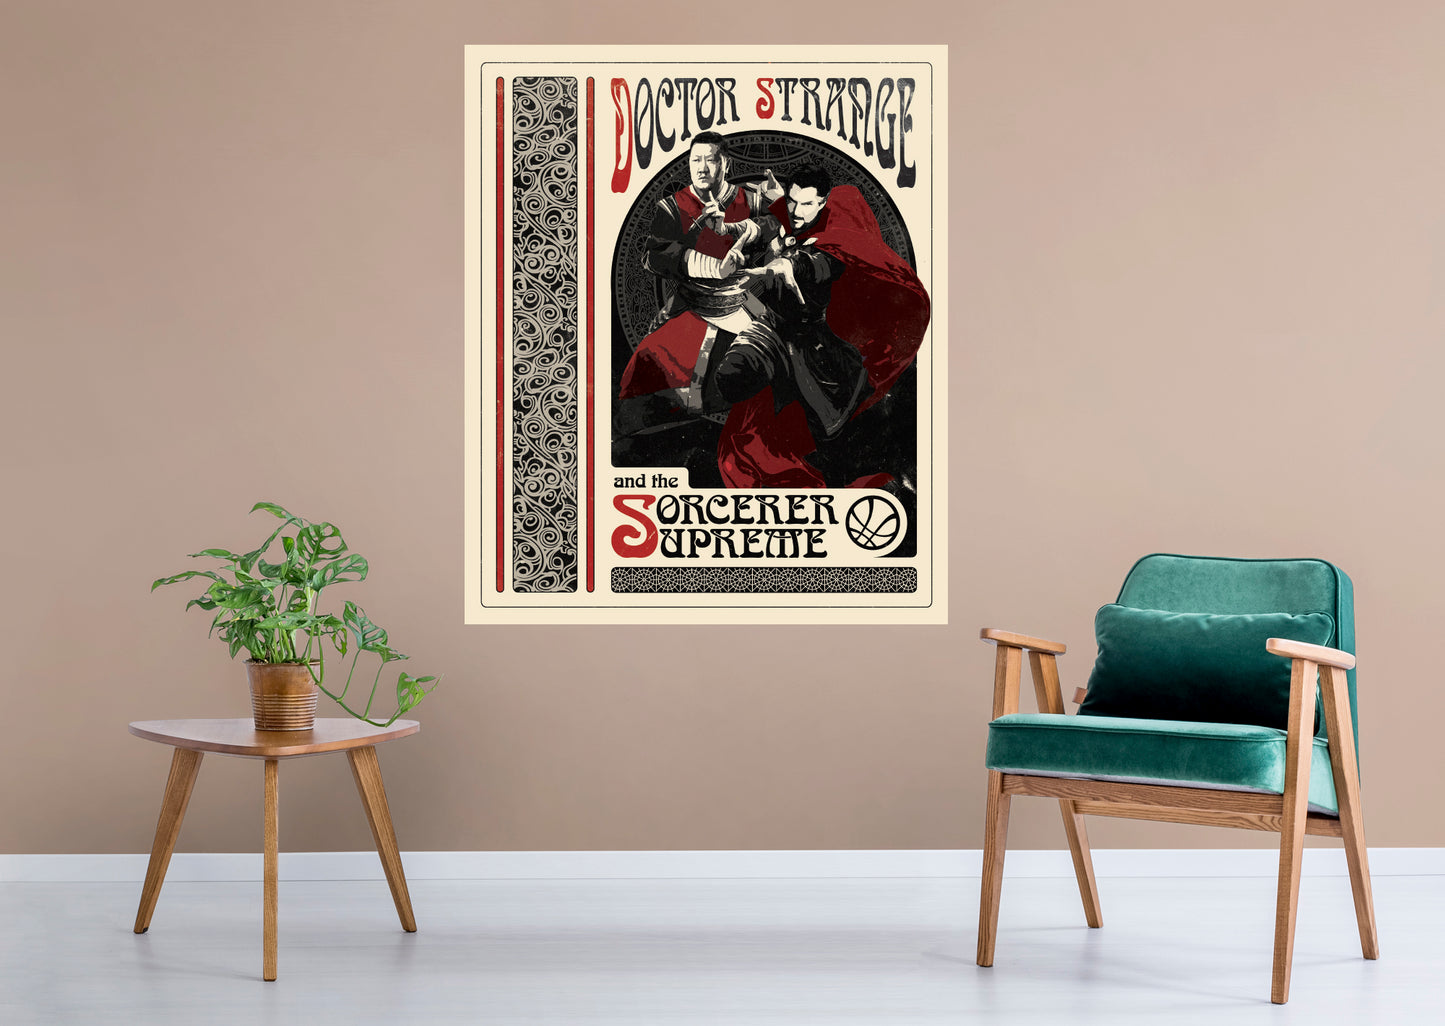 Doctor Strange 2: In the Multiverse of Madness: The Sorcerer Supreme Poster - Officially Licensed Marvel Removable Adhesive Decal